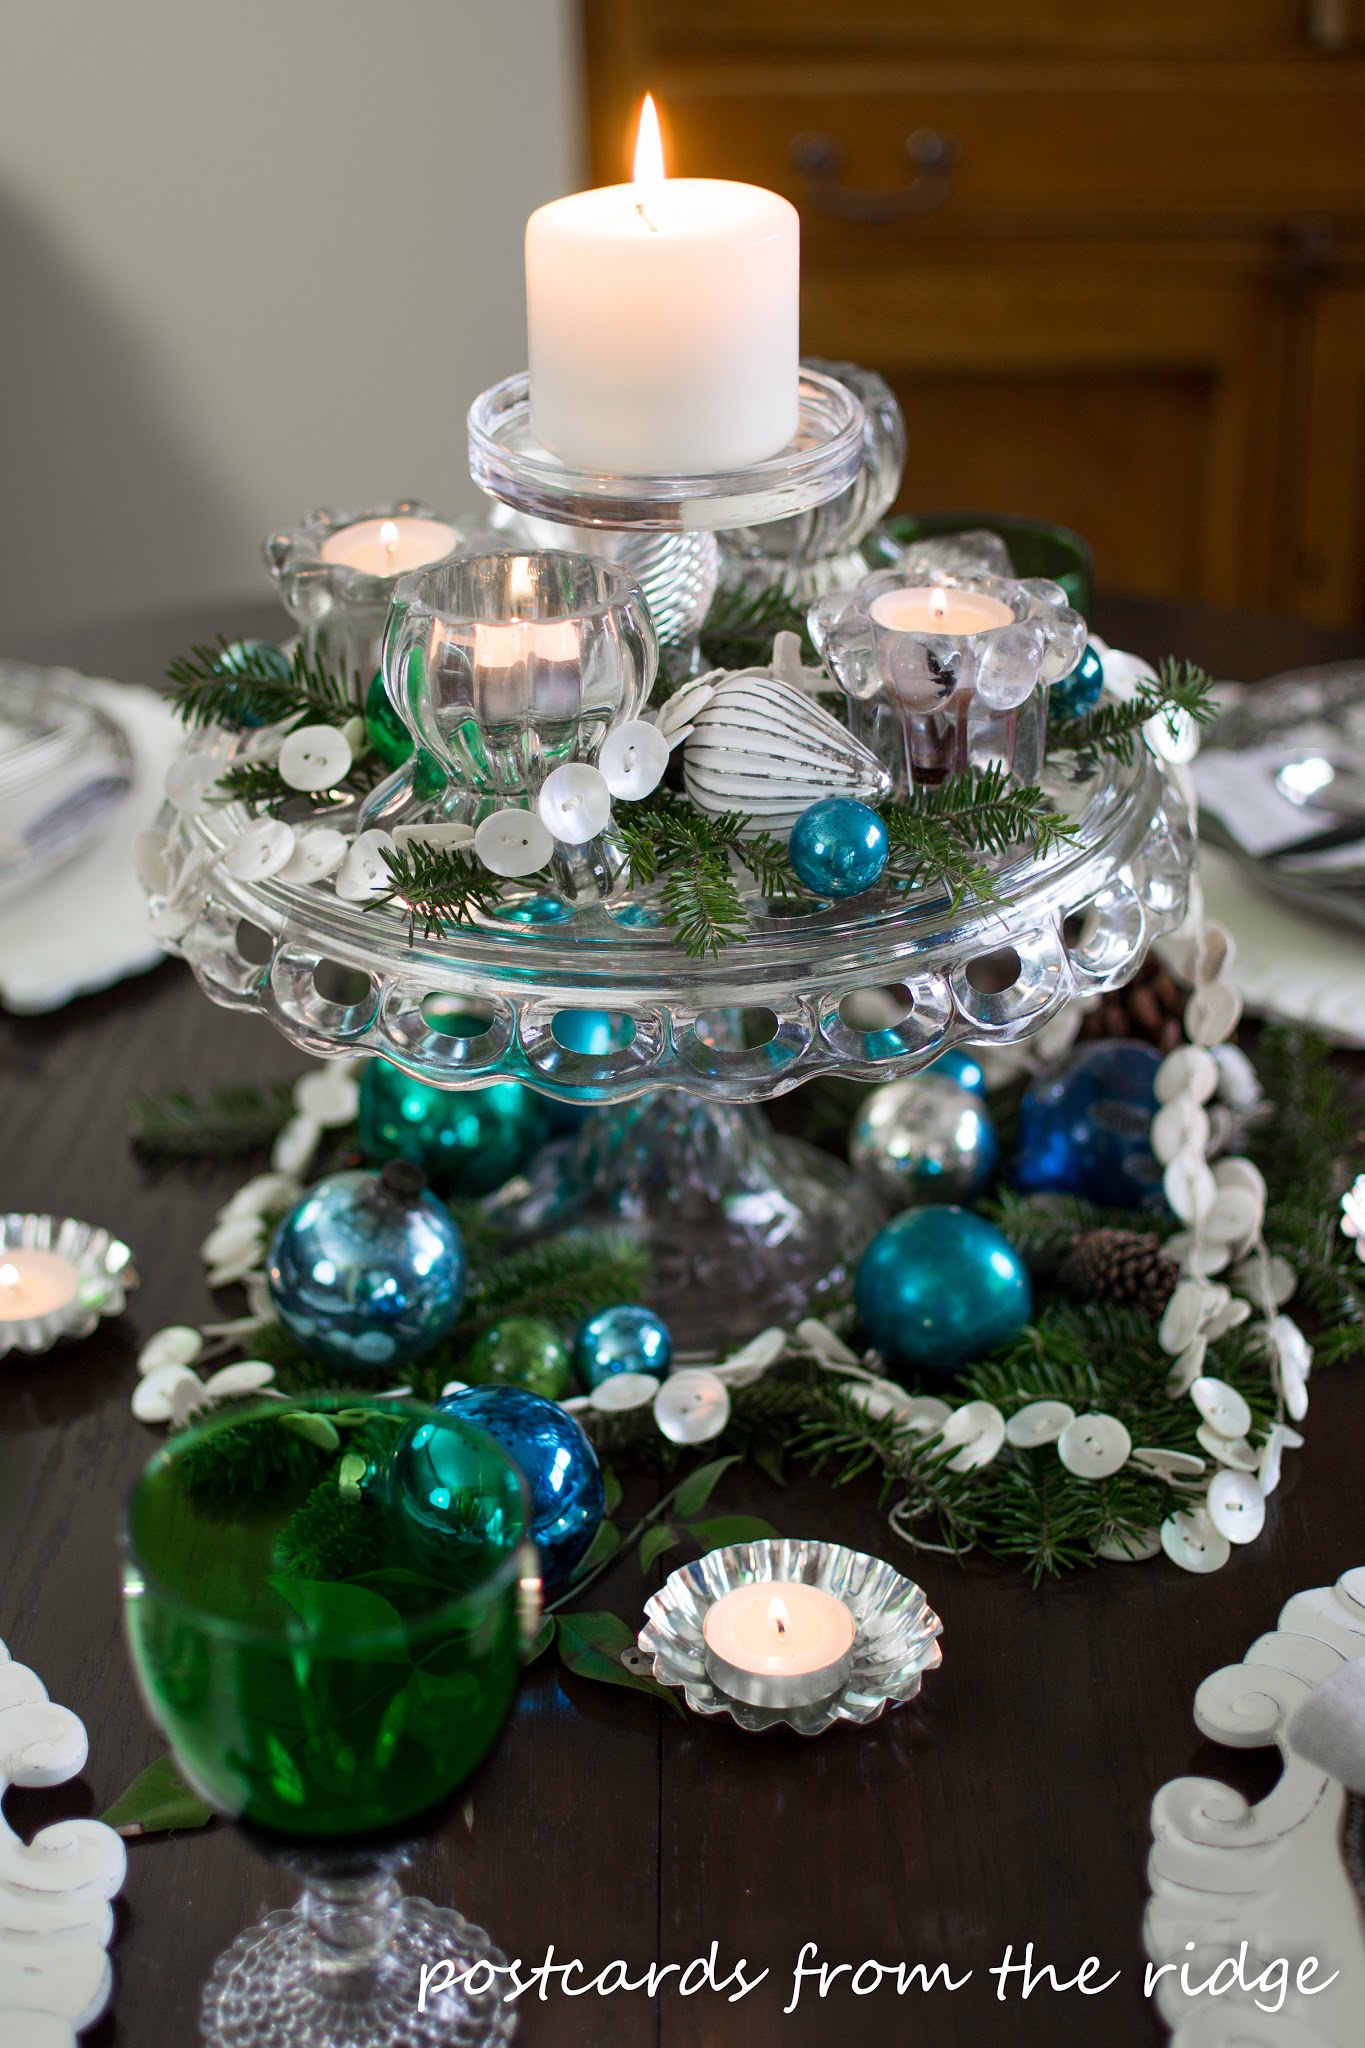 Holiday Tablescape Ideas using mostly vintage items. Love the cake stand as a centerpiece.